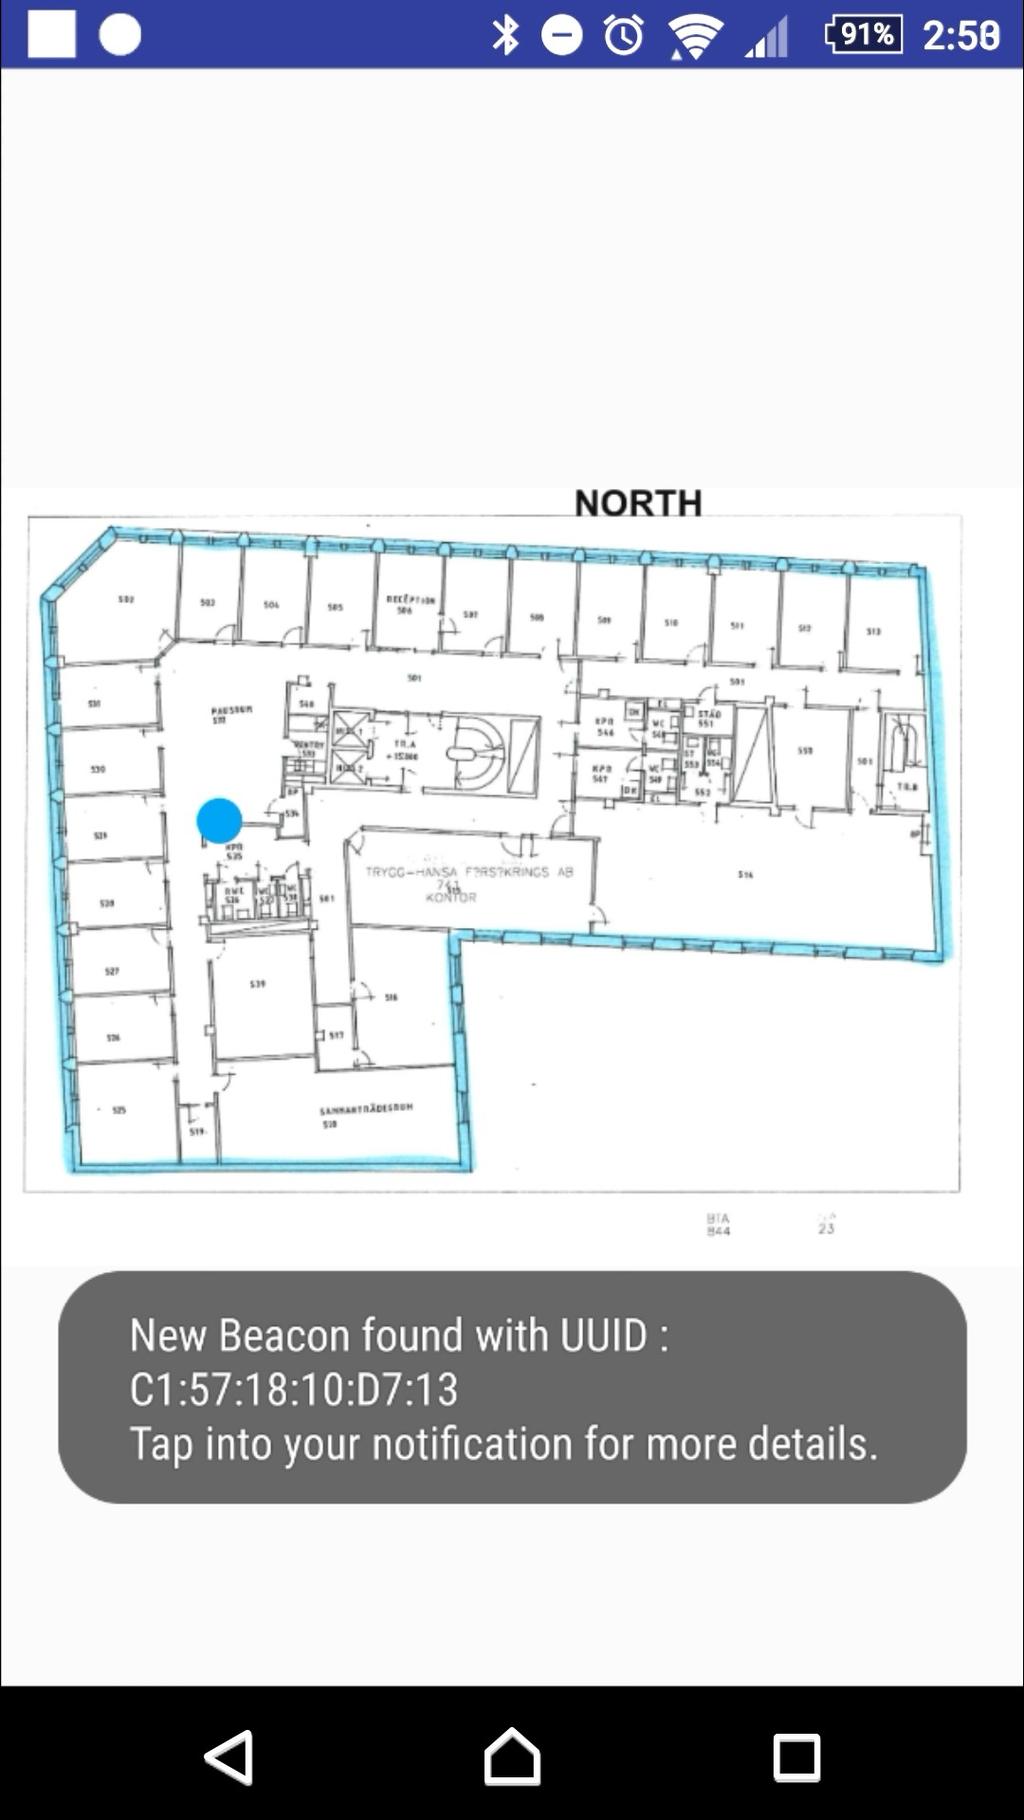 5 Results By running the actual user app, you will get the map of the building and your accurate location.